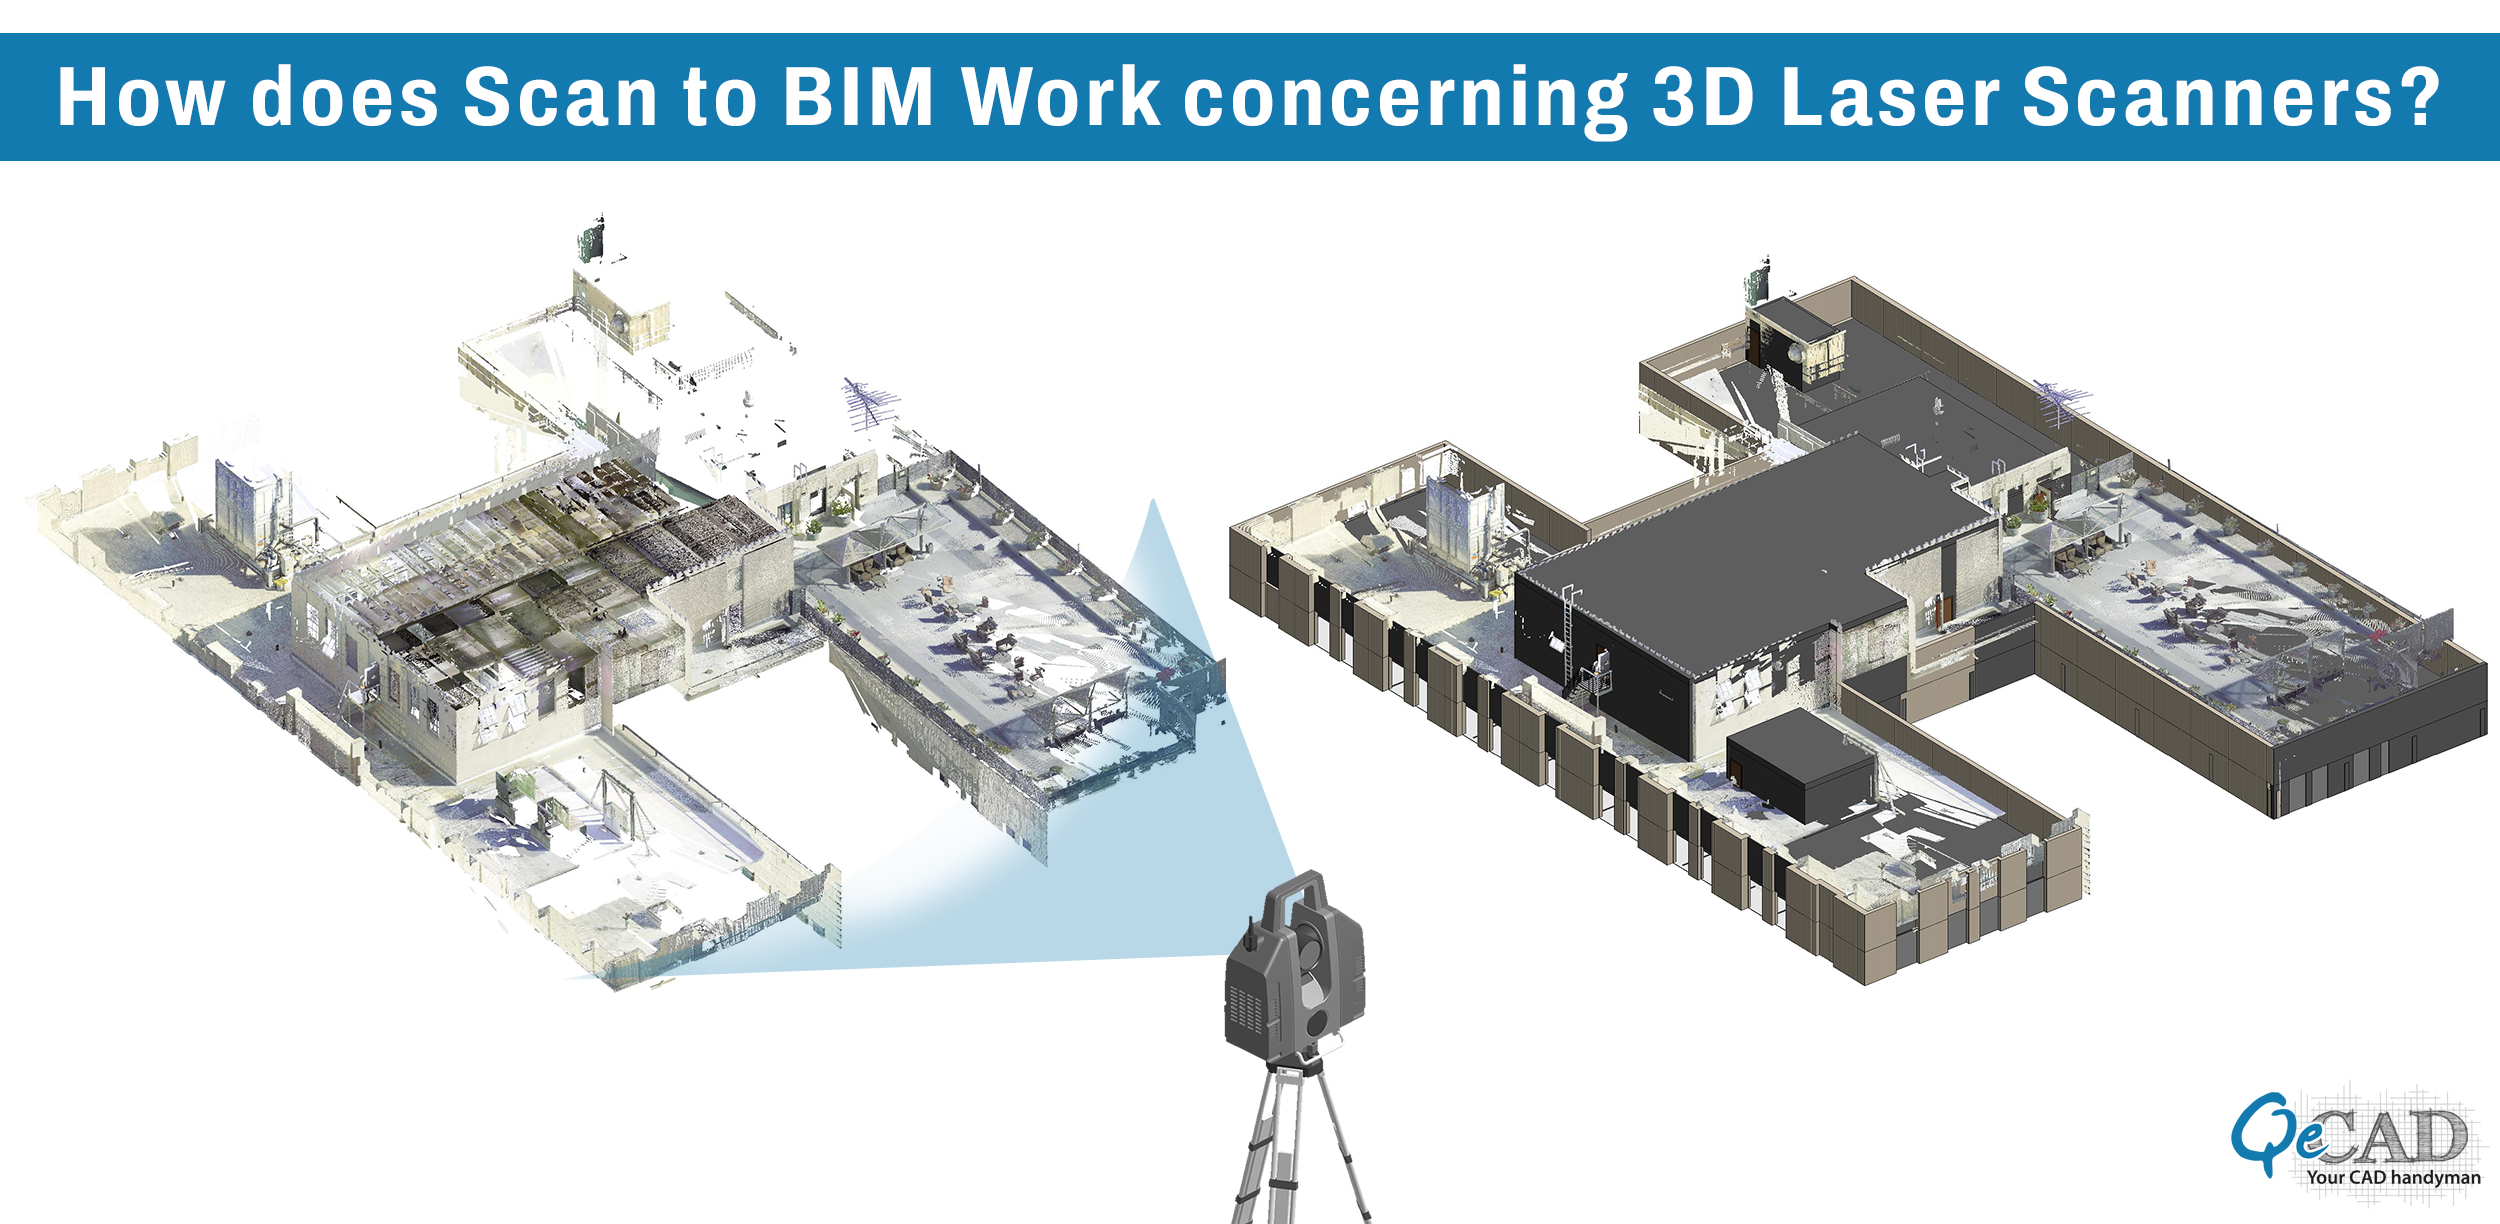 How does Scan to BIM Work concerning 3D Laser Scanners?